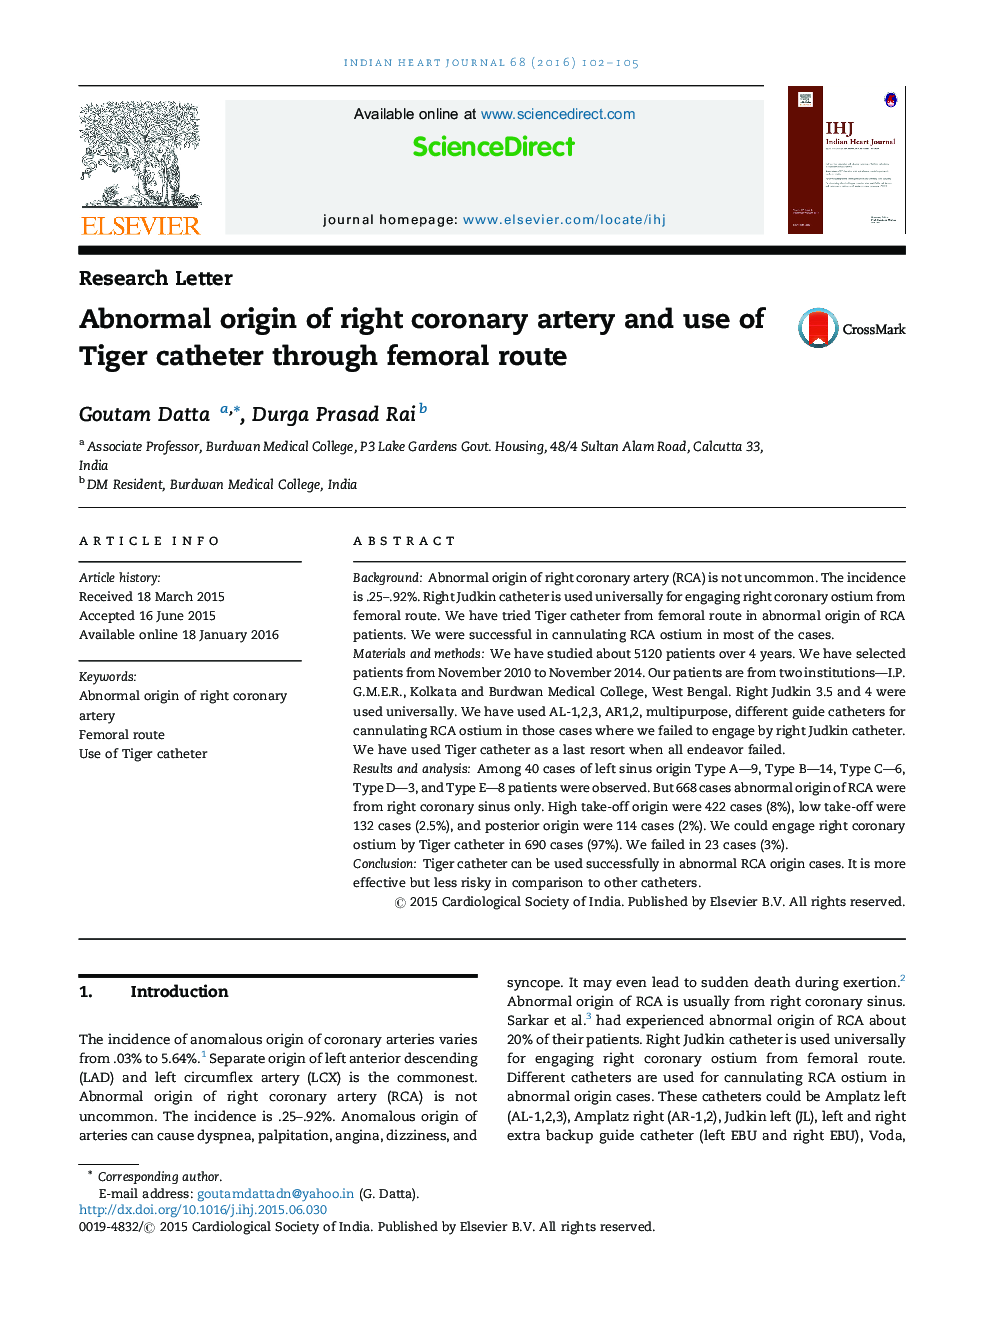 Abnormal origin of right coronary artery and use of Tiger catheter through femoral route